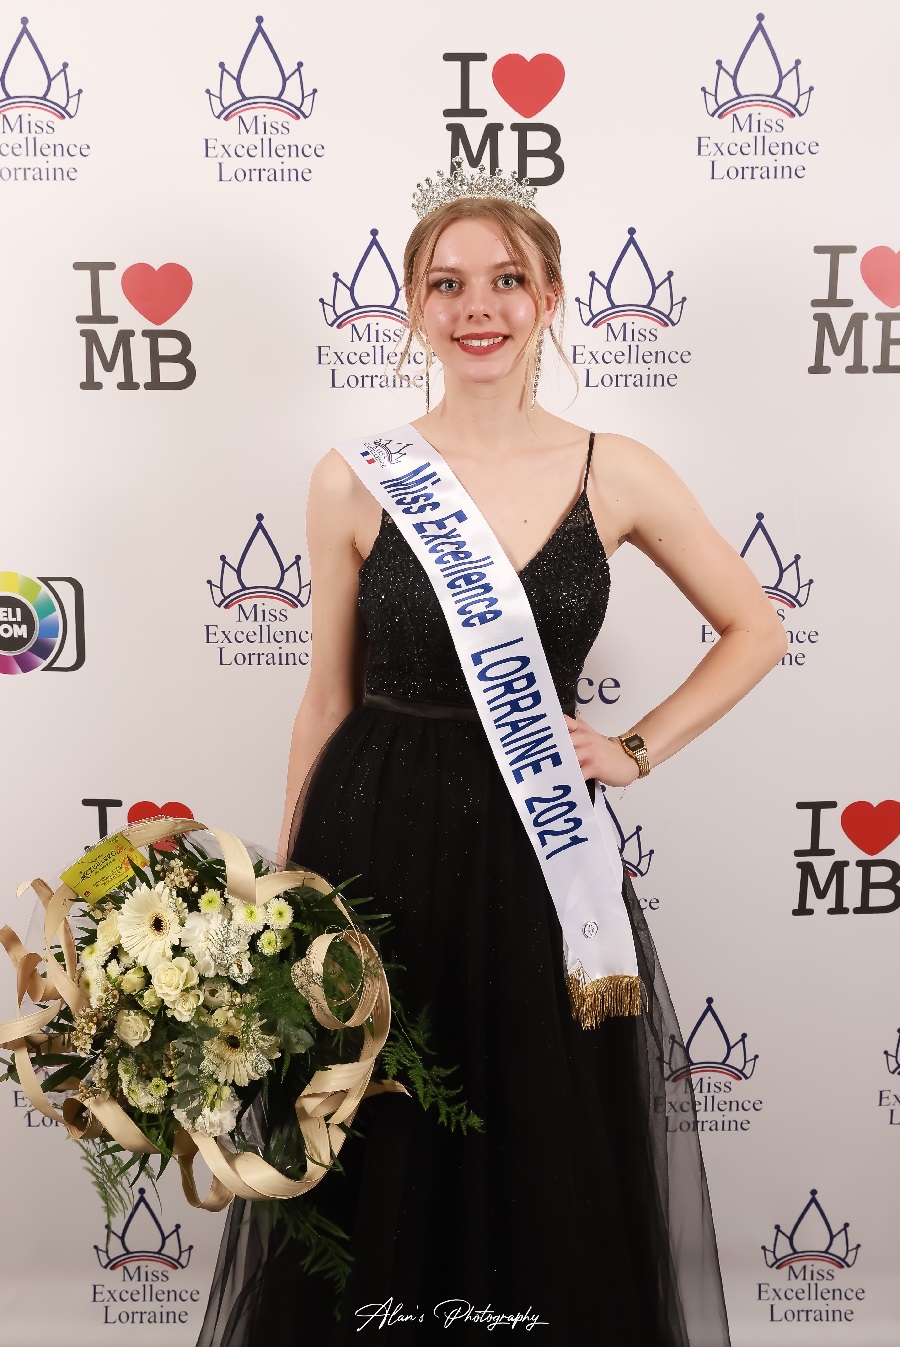 Cassandra Le Galludec Miss Excellence Lorraine